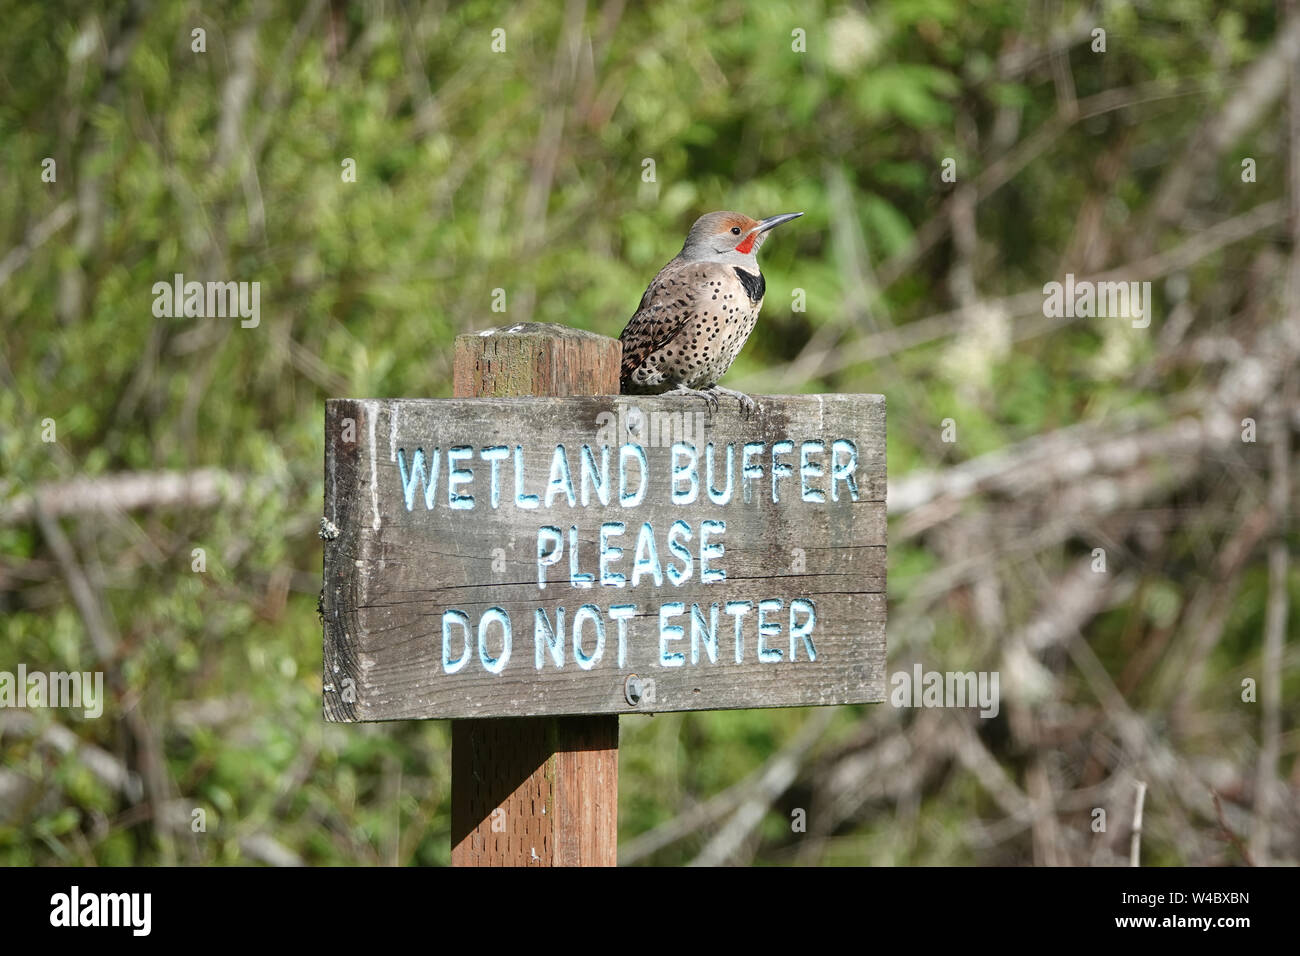 Northern flicker or common flicker (Colaptes auratus) sitting on 'Wetland buffer, please do not enter' sign in a park in Kirkland, WA, USA Stock Photo